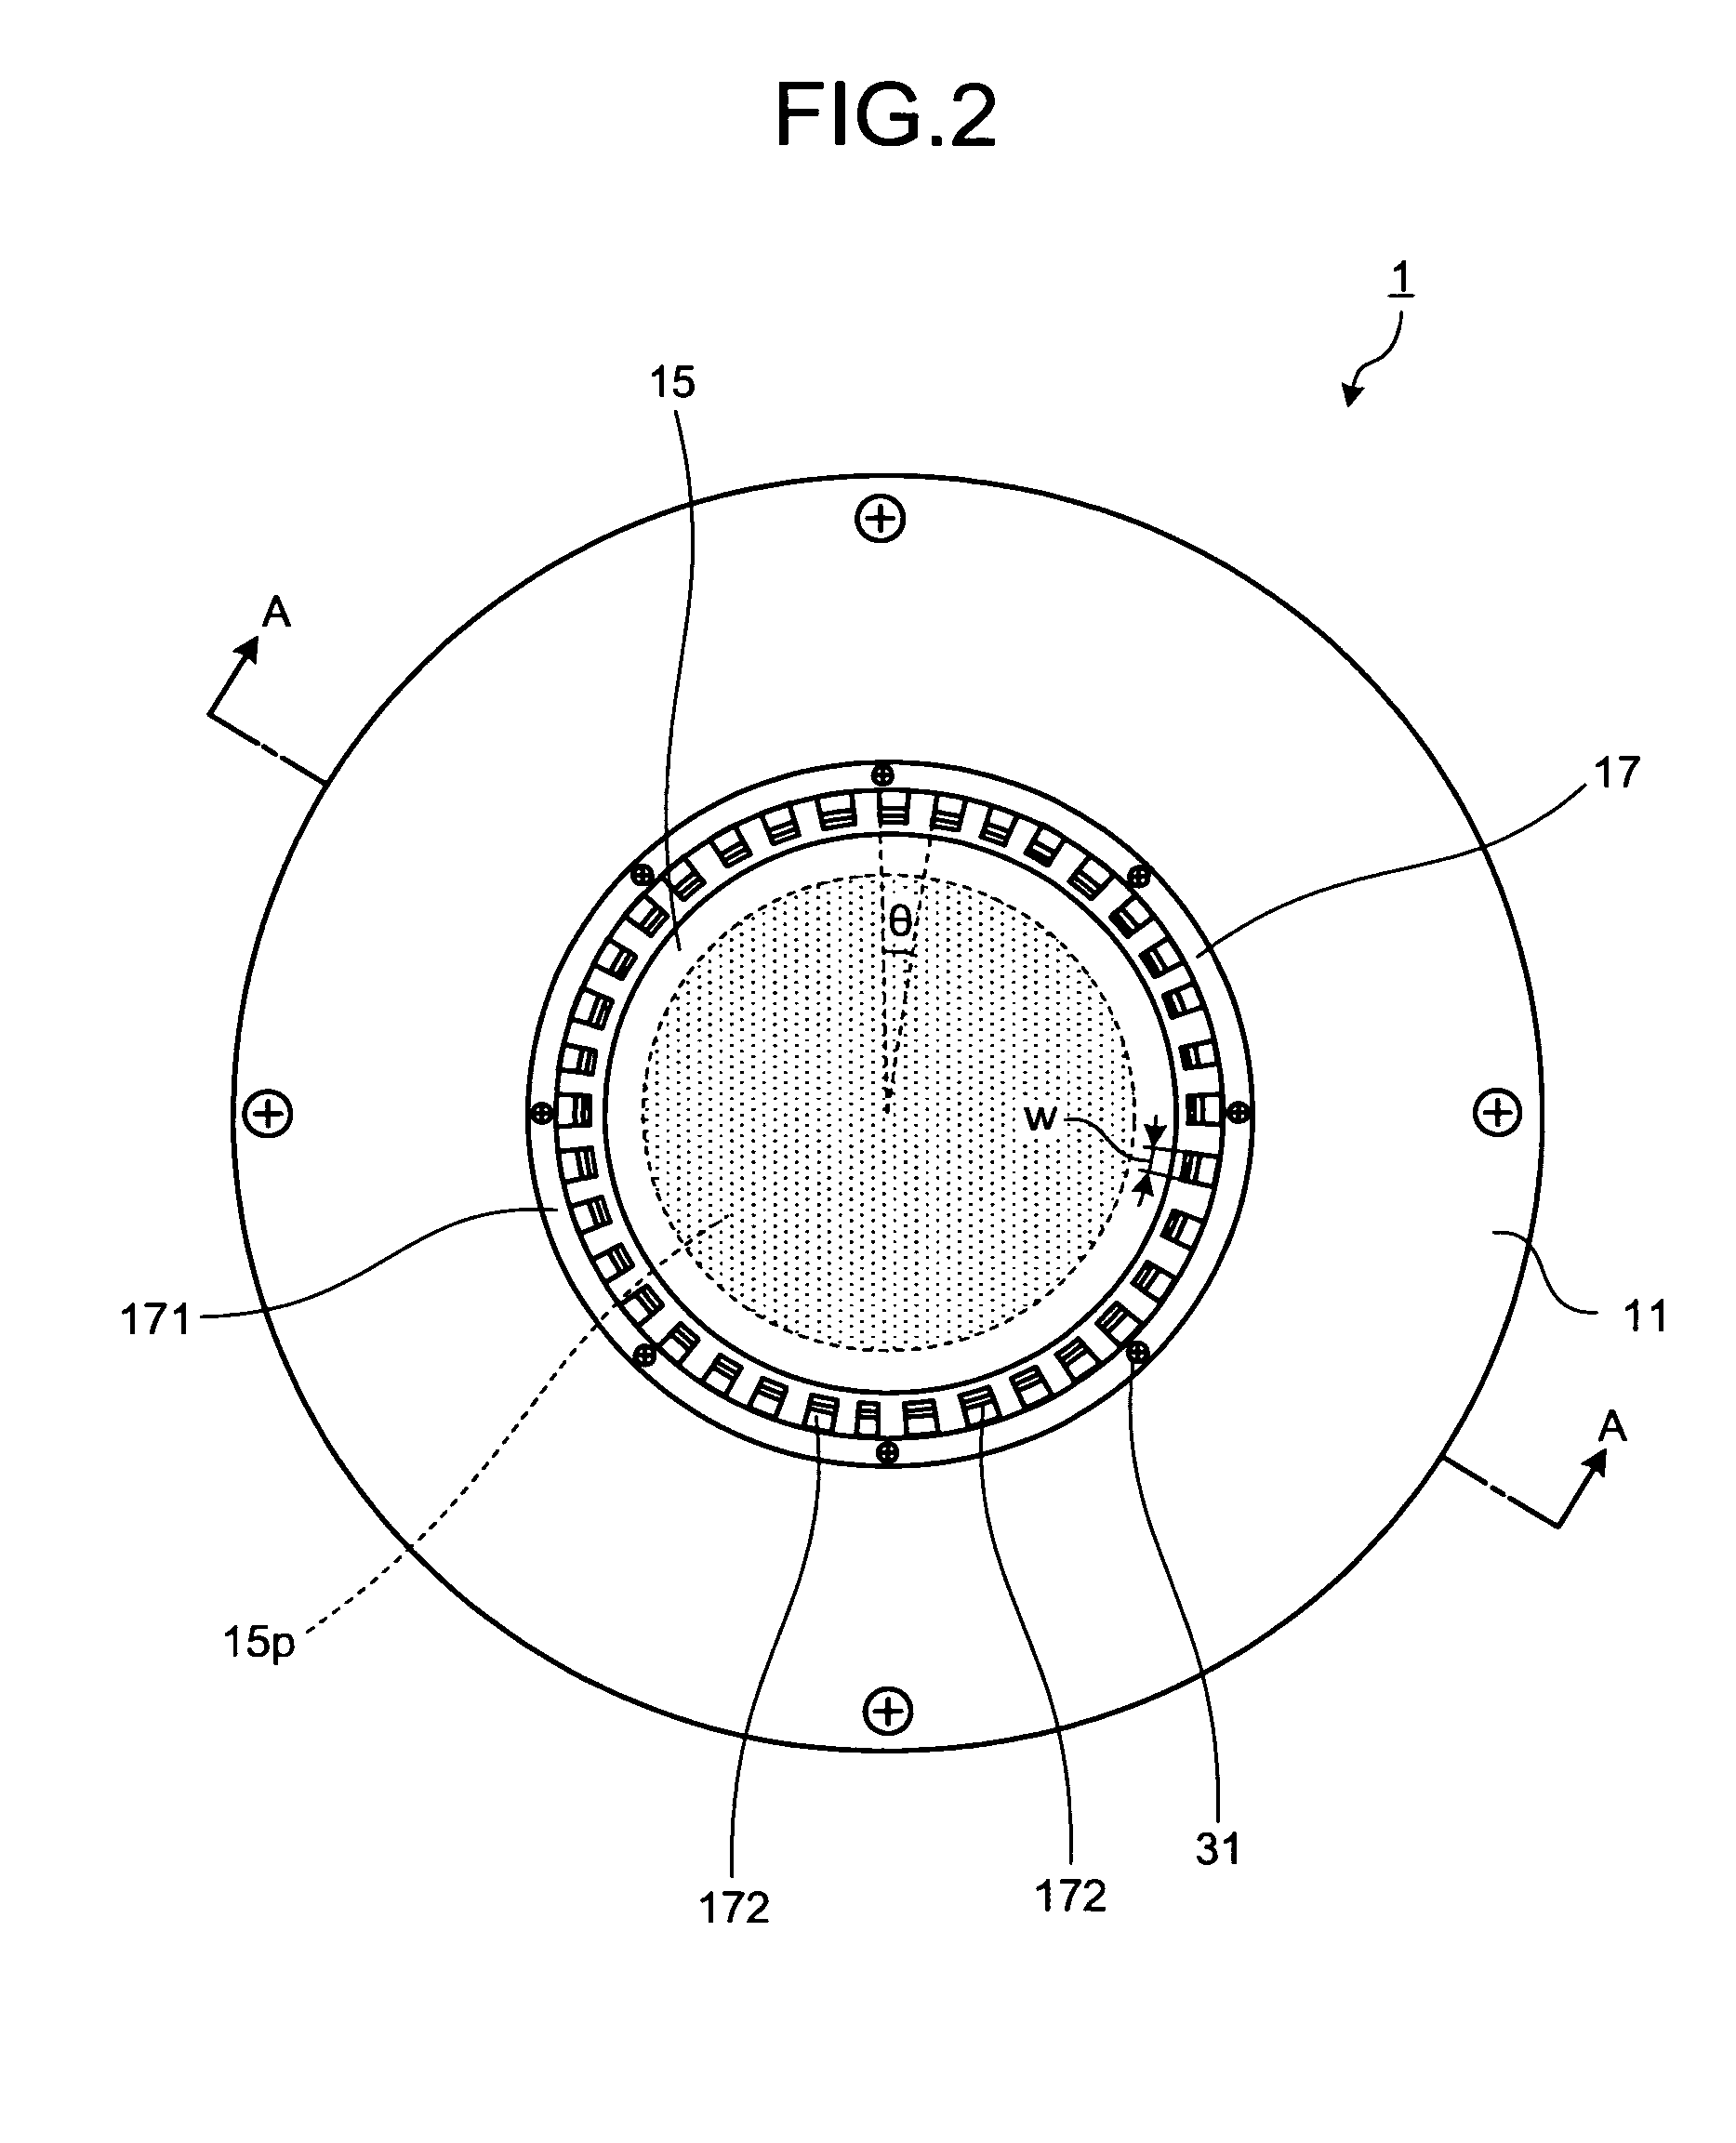 Probe card for a semiconductor wafer